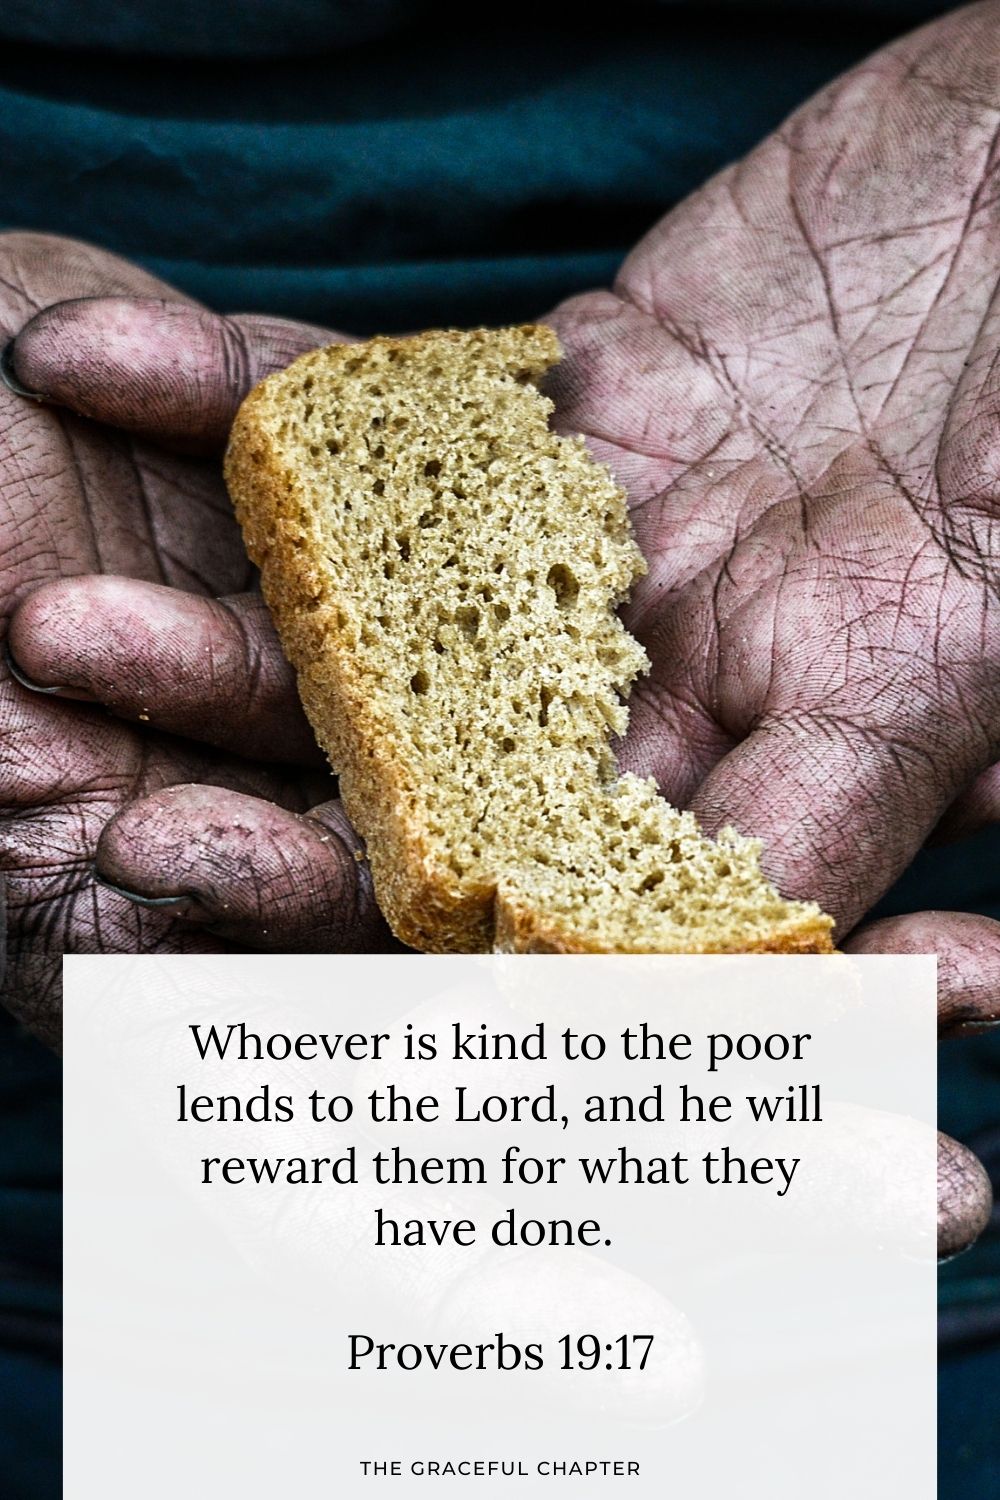 Whoever is kind to the poor lends to the Lord,  and he will reward them for what they have done. Proverbs 19:17